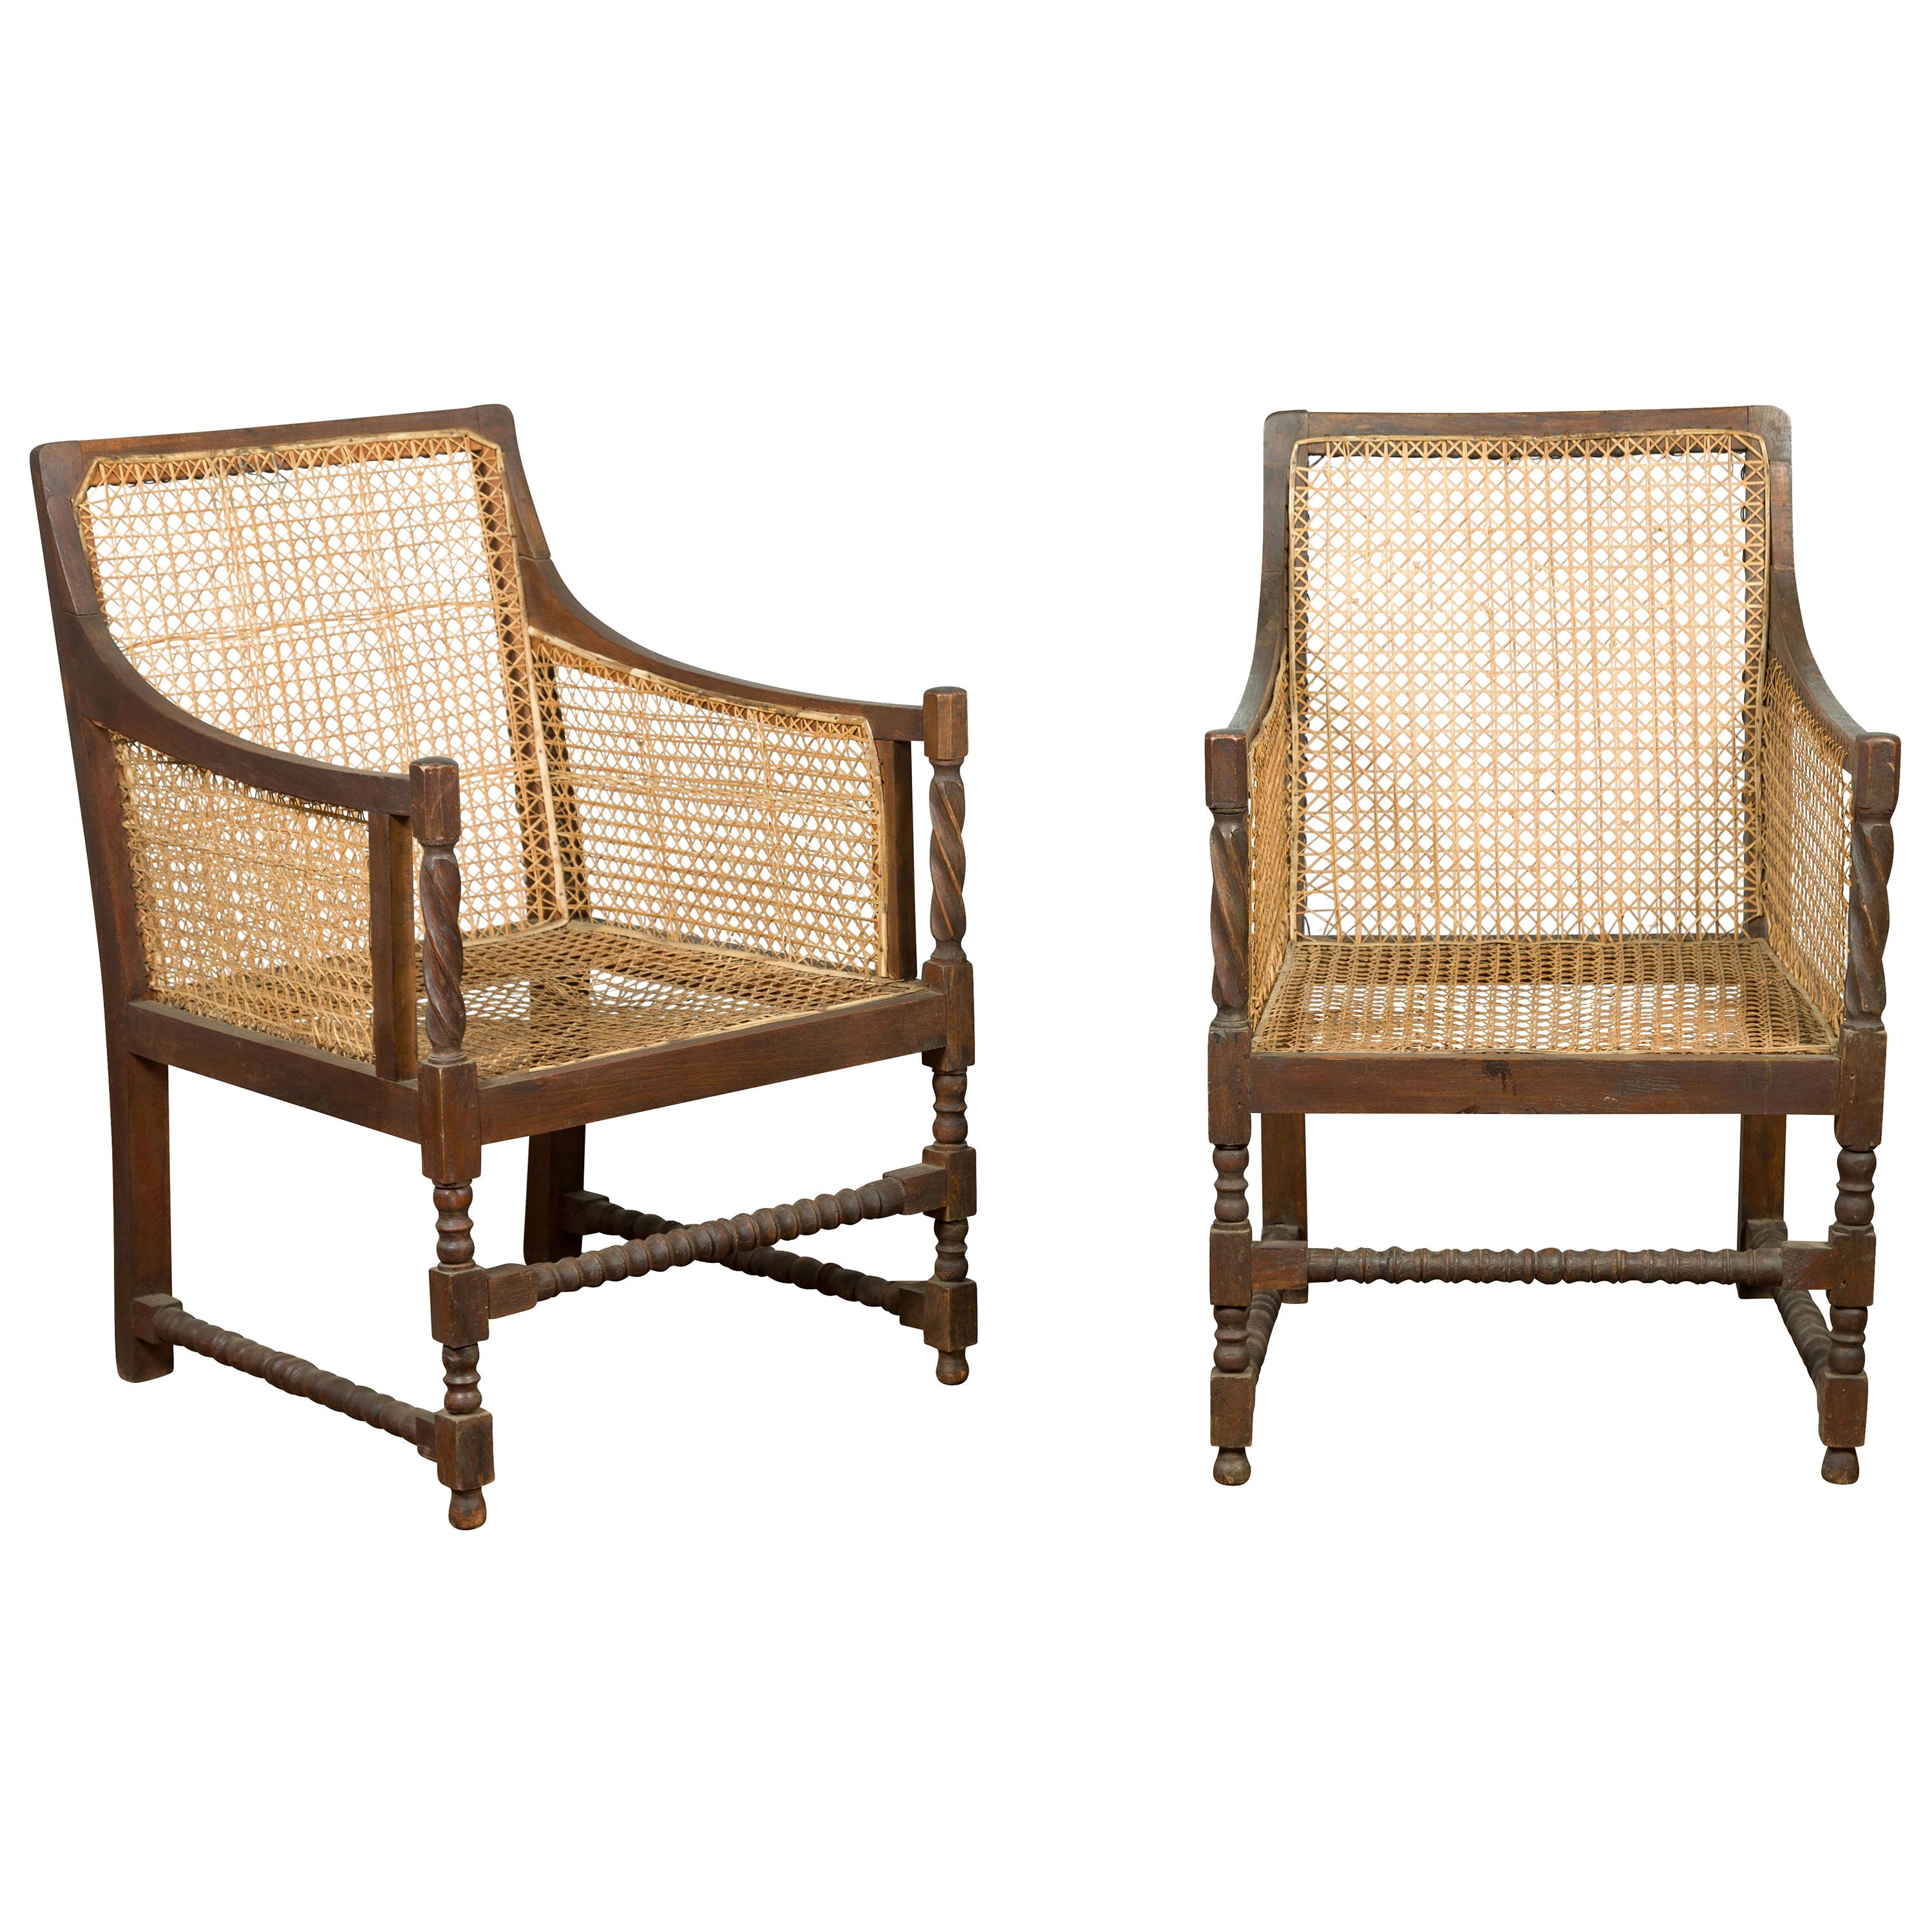 Pair of Antique Rustic Thai Turned Wood Armchairs with Rattan Backs and Seats